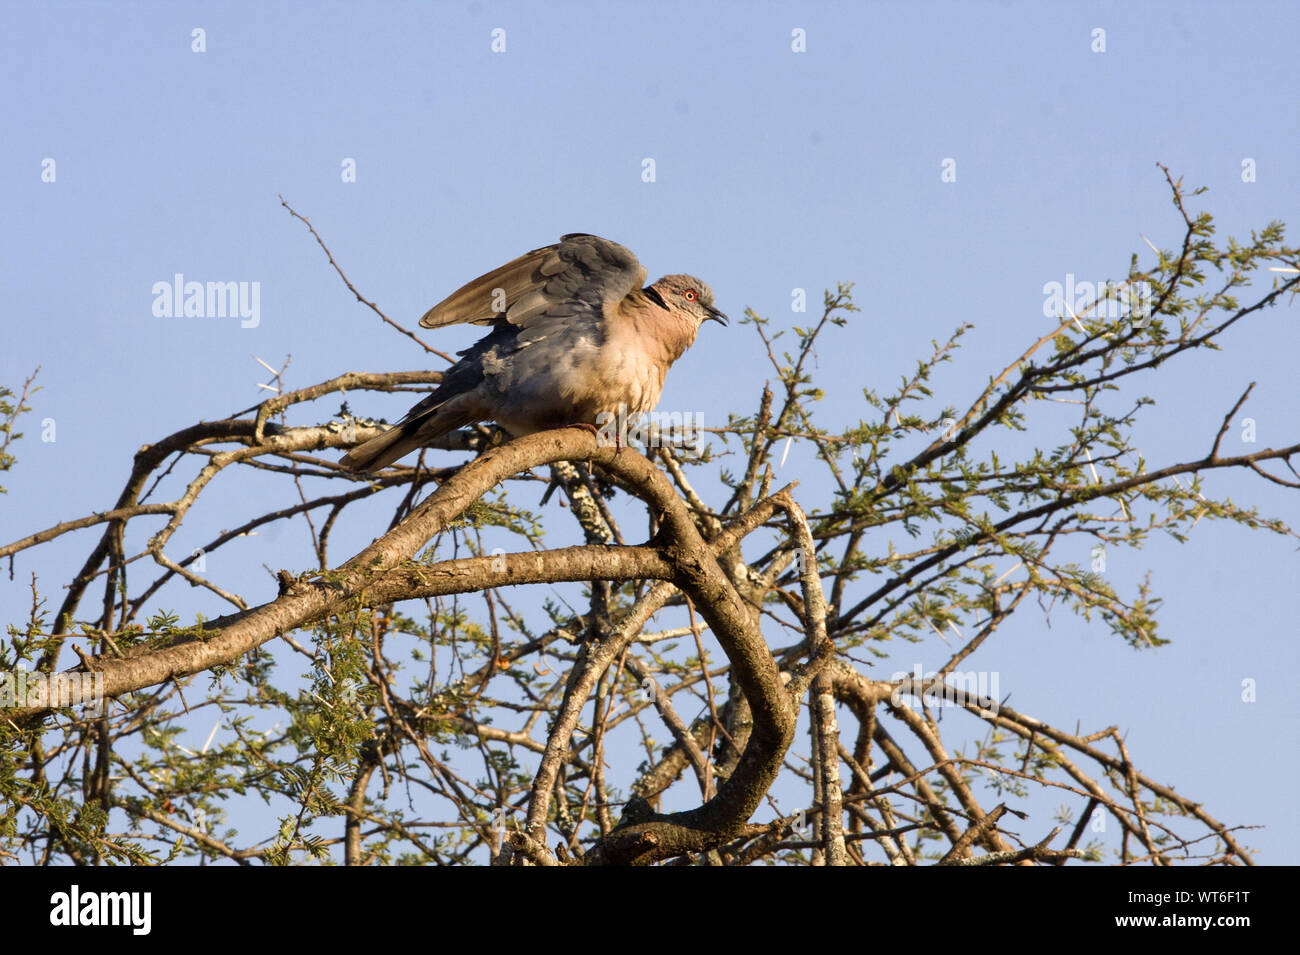 A Mourning Dove in South Africa perches on the top of a tree Stock Photo